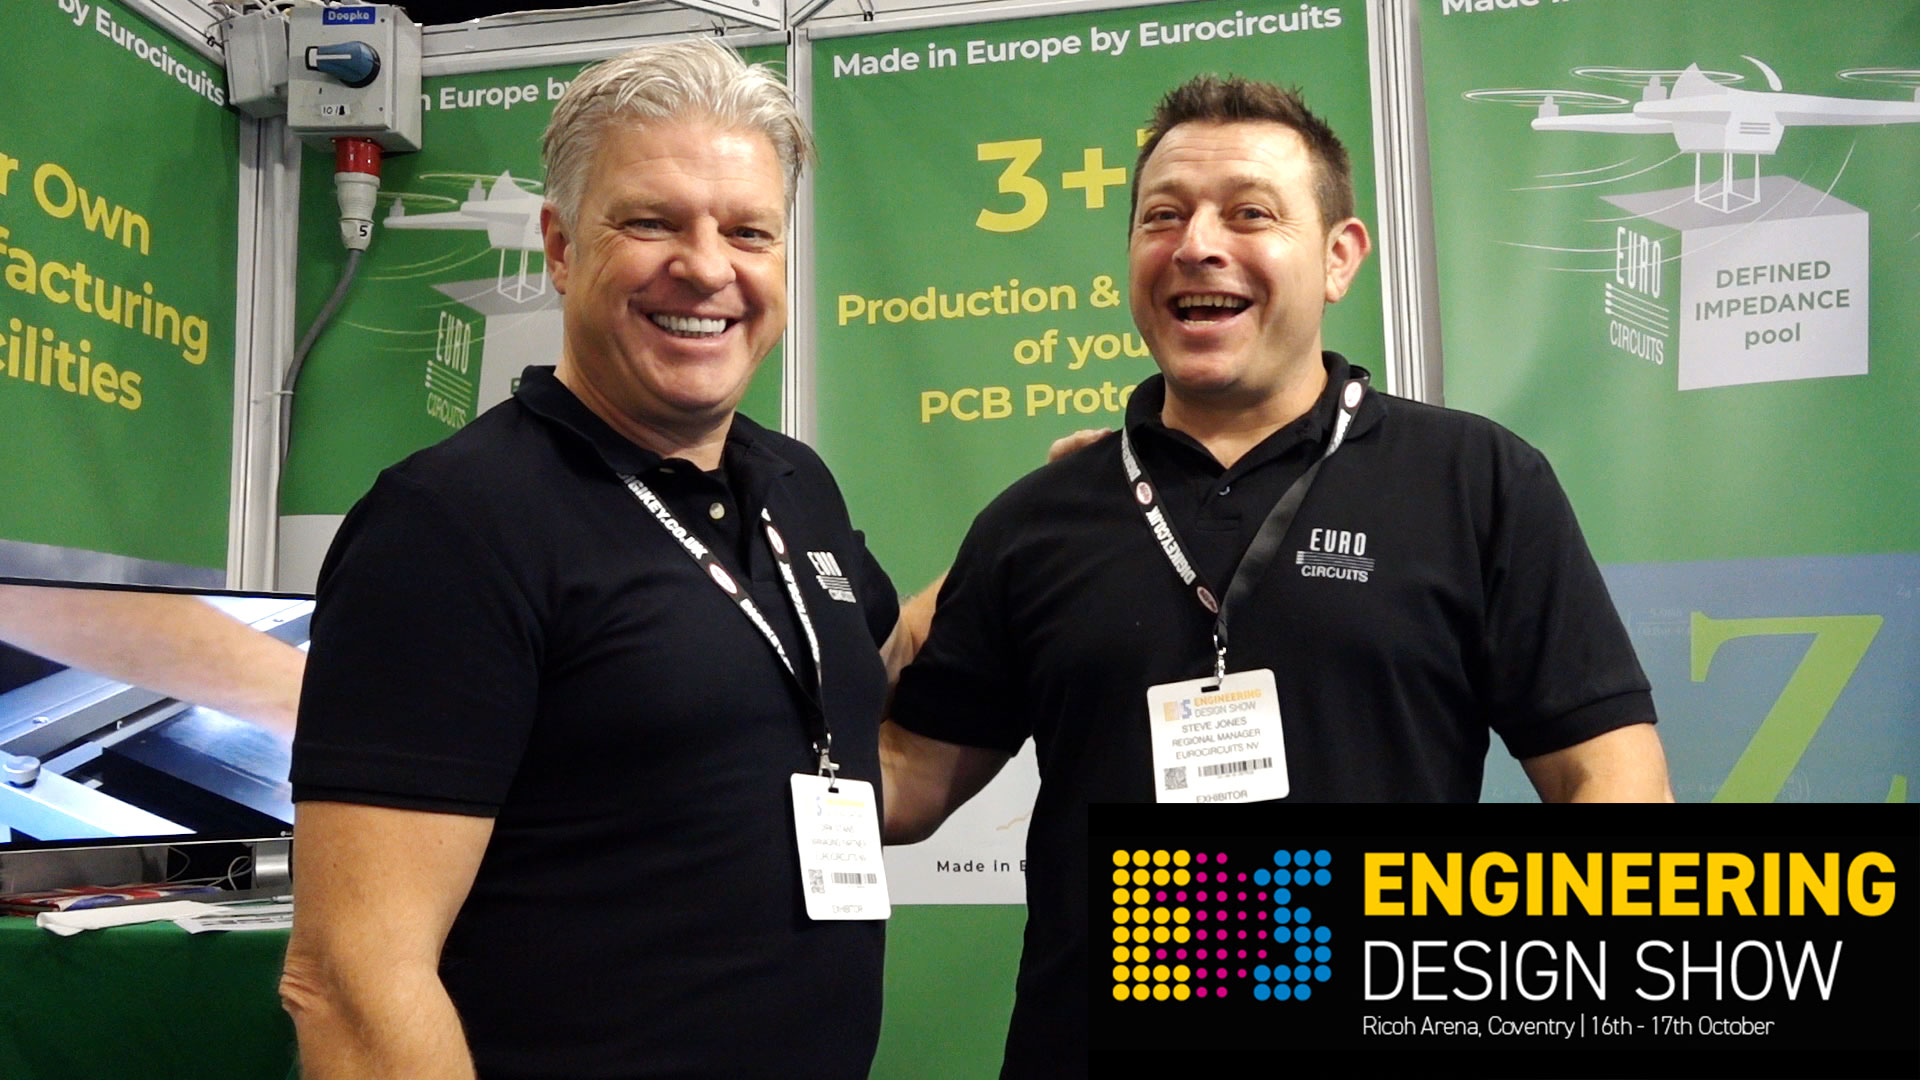 This was the Engineering Design Show 2019 in Coventry UK